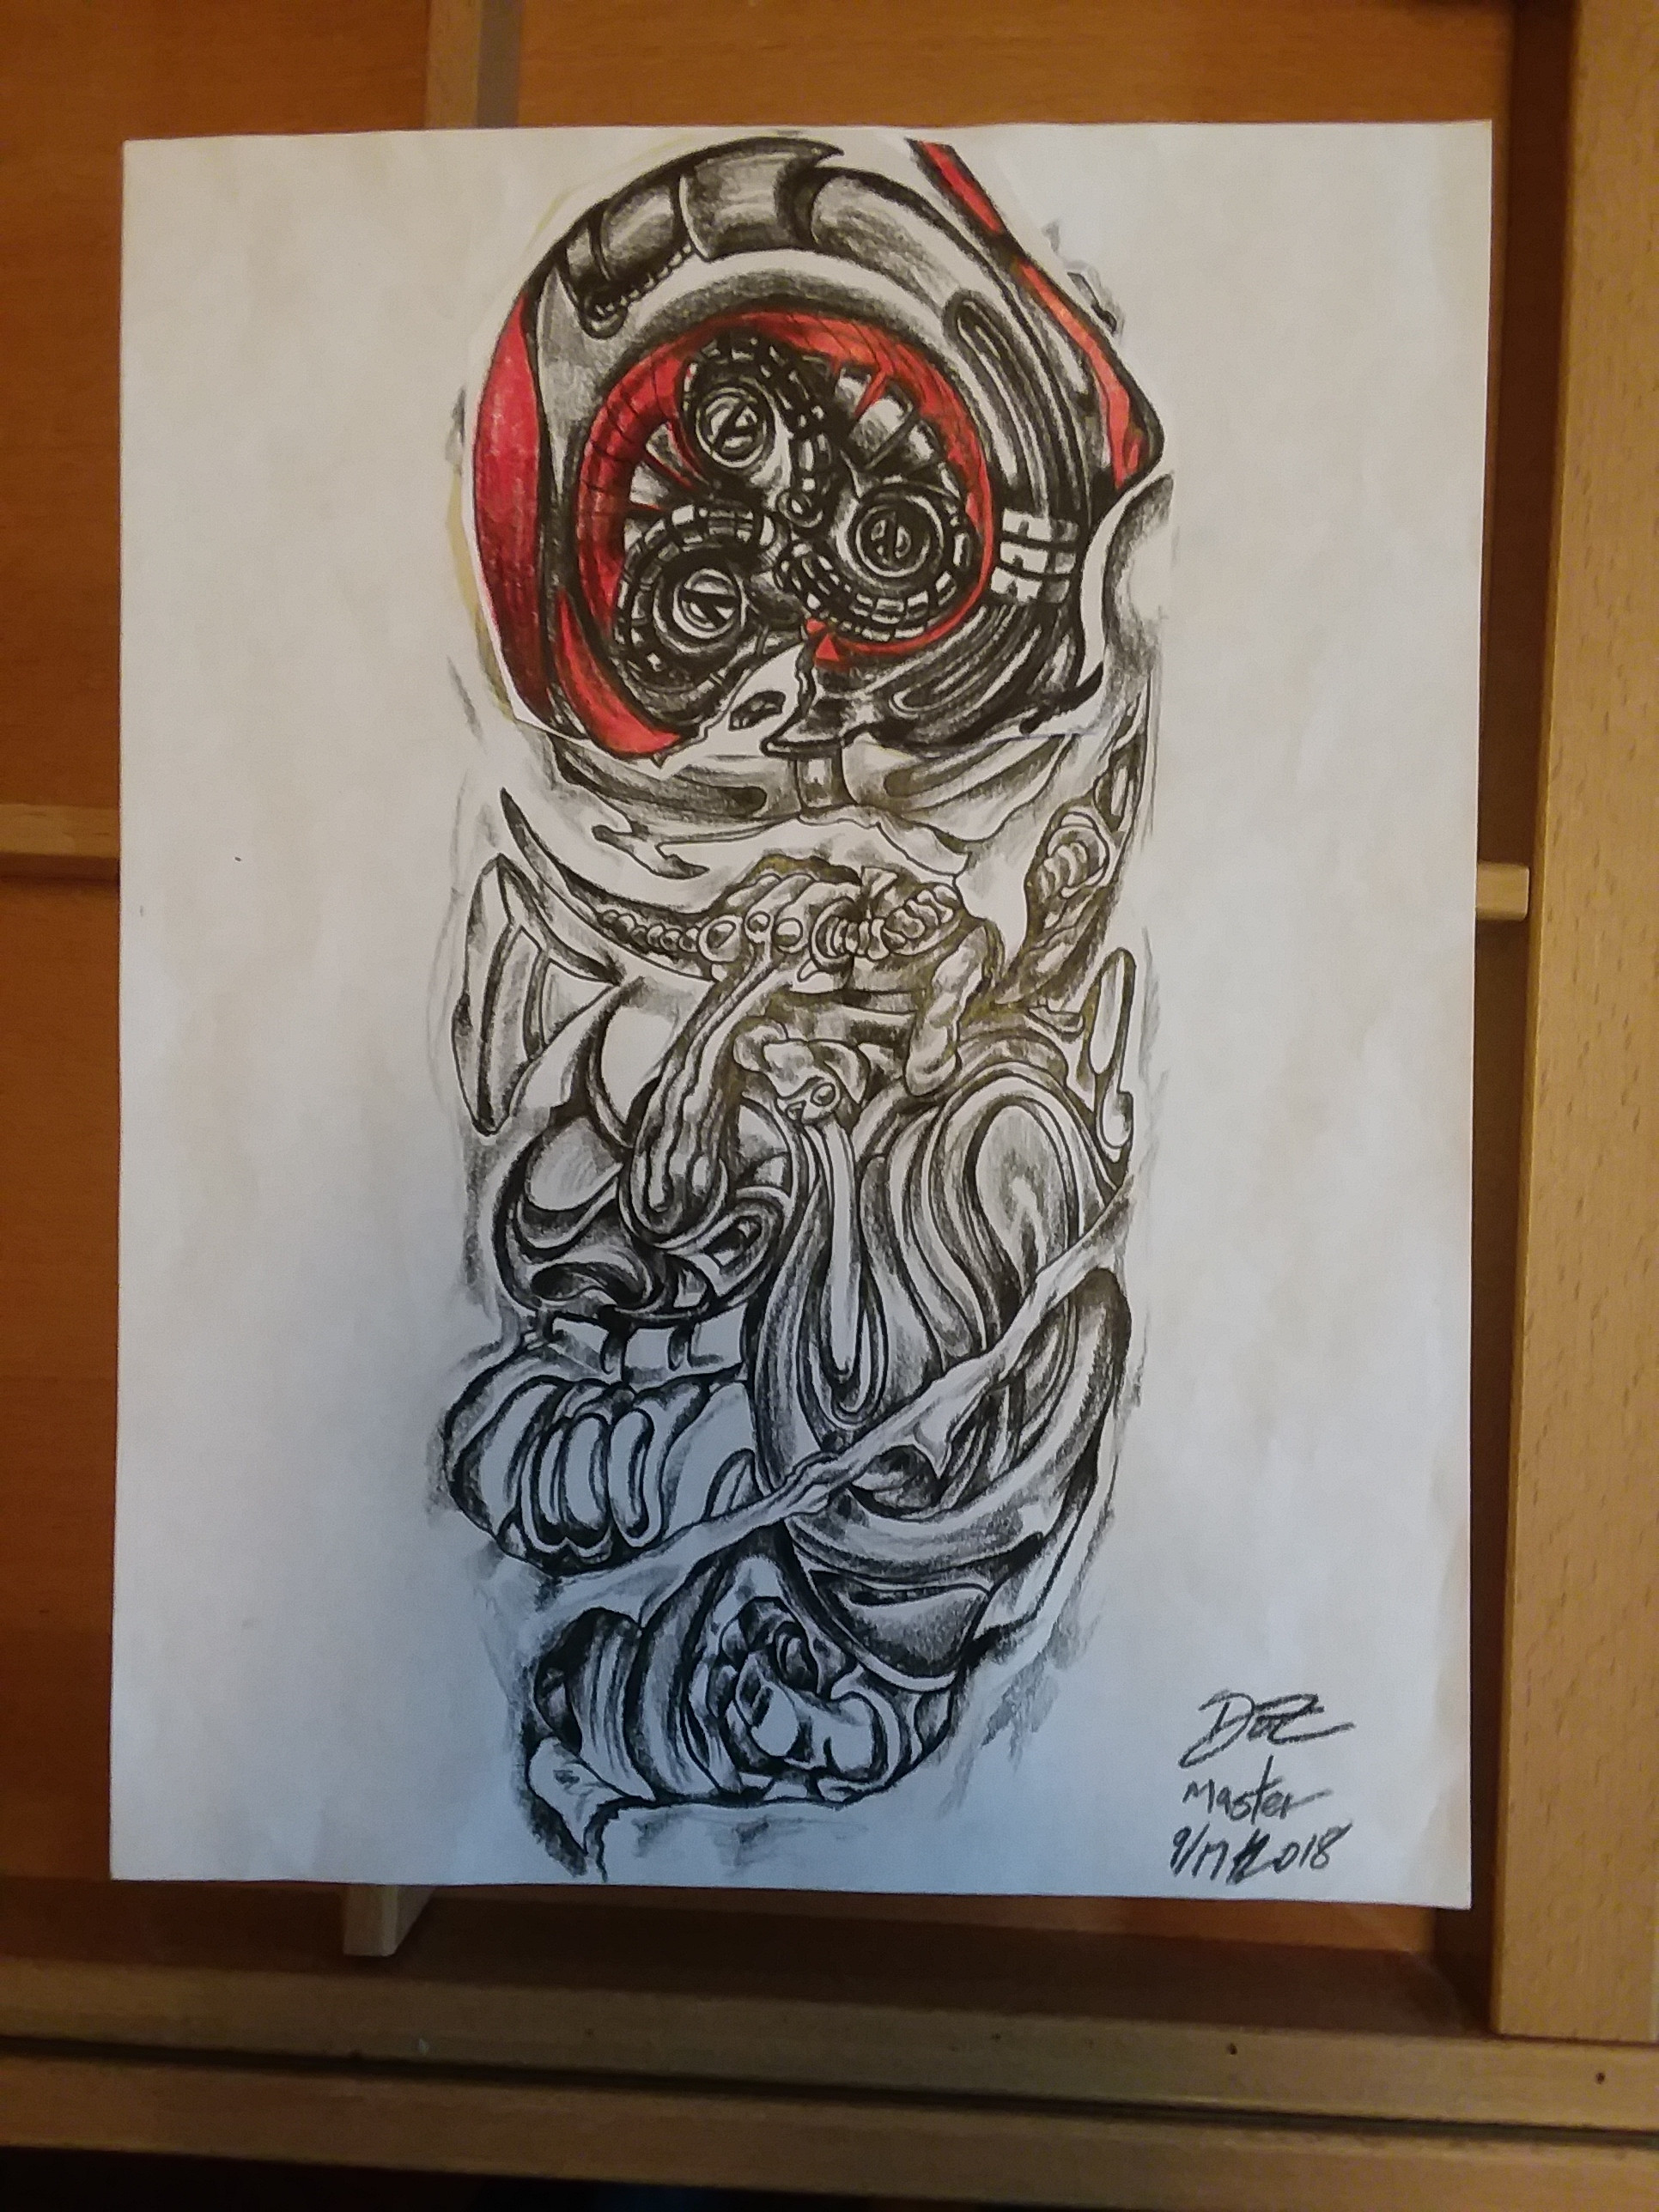 ArtStation - Biomechanical Tattoo design - one of 5 parts to be designed and tattooed on a client.